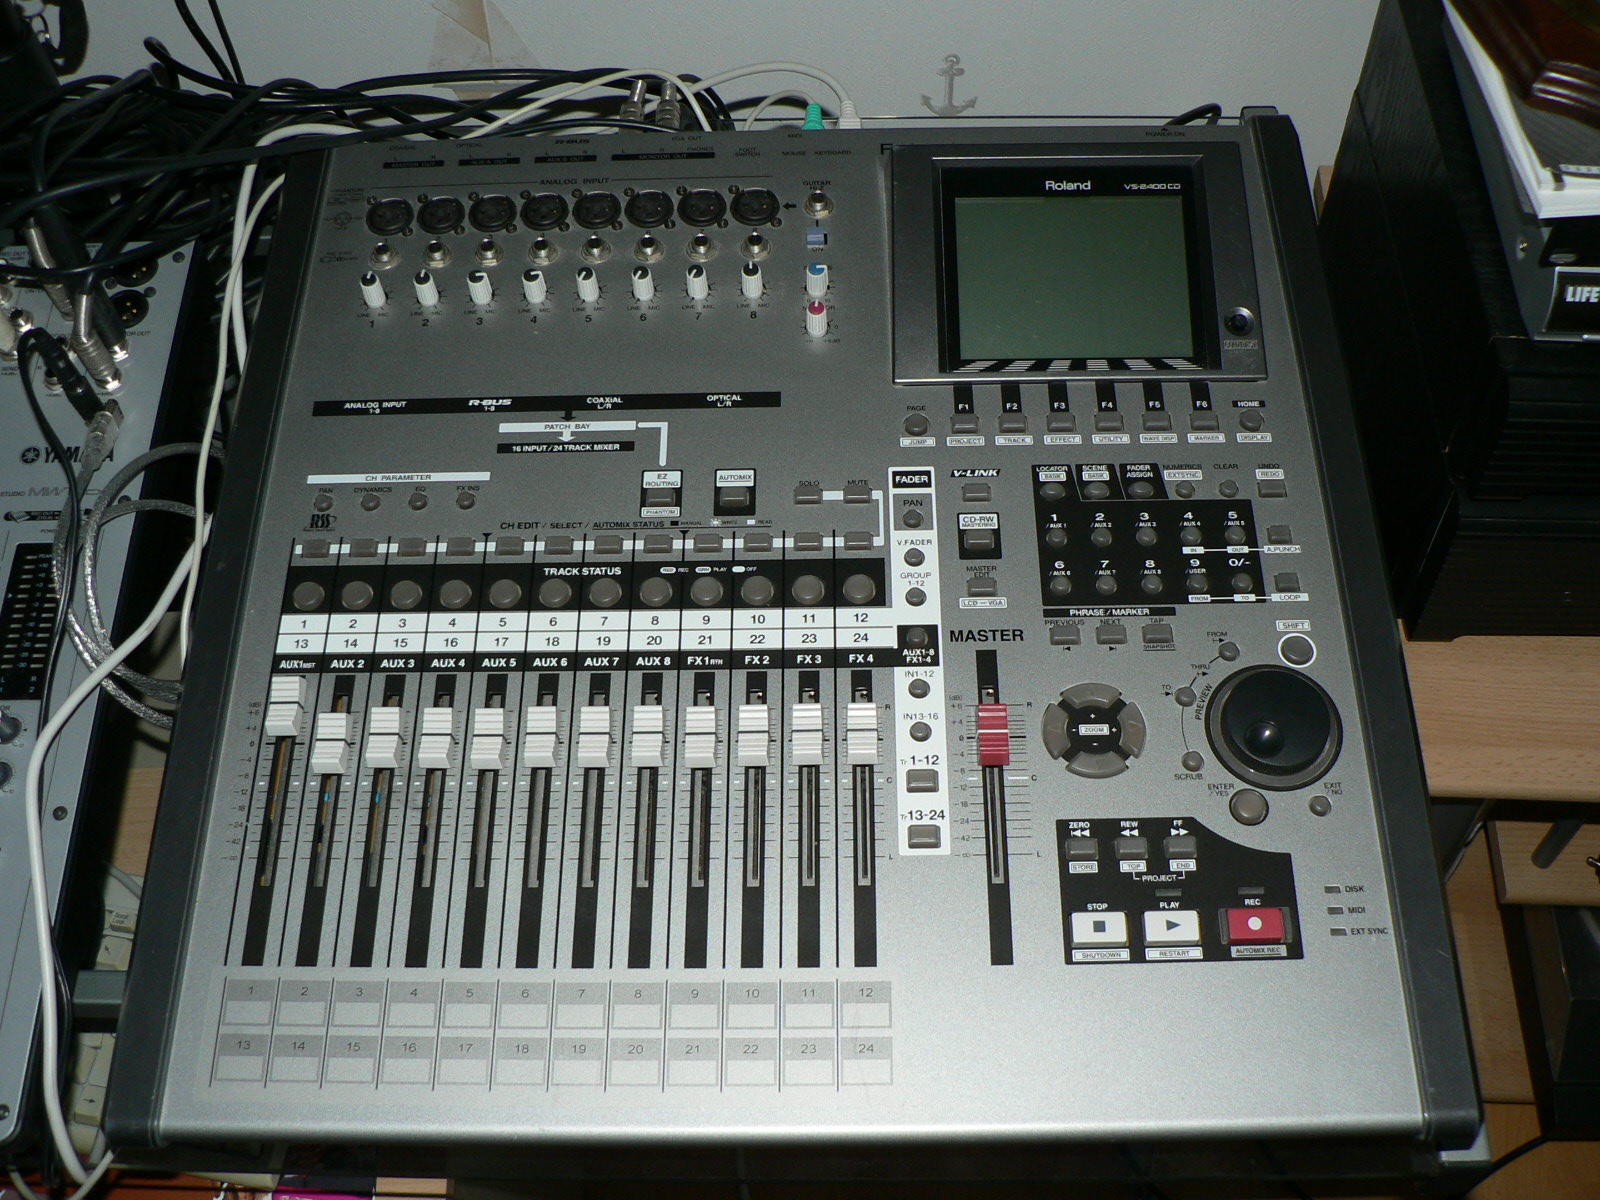 cdxtract roland cd